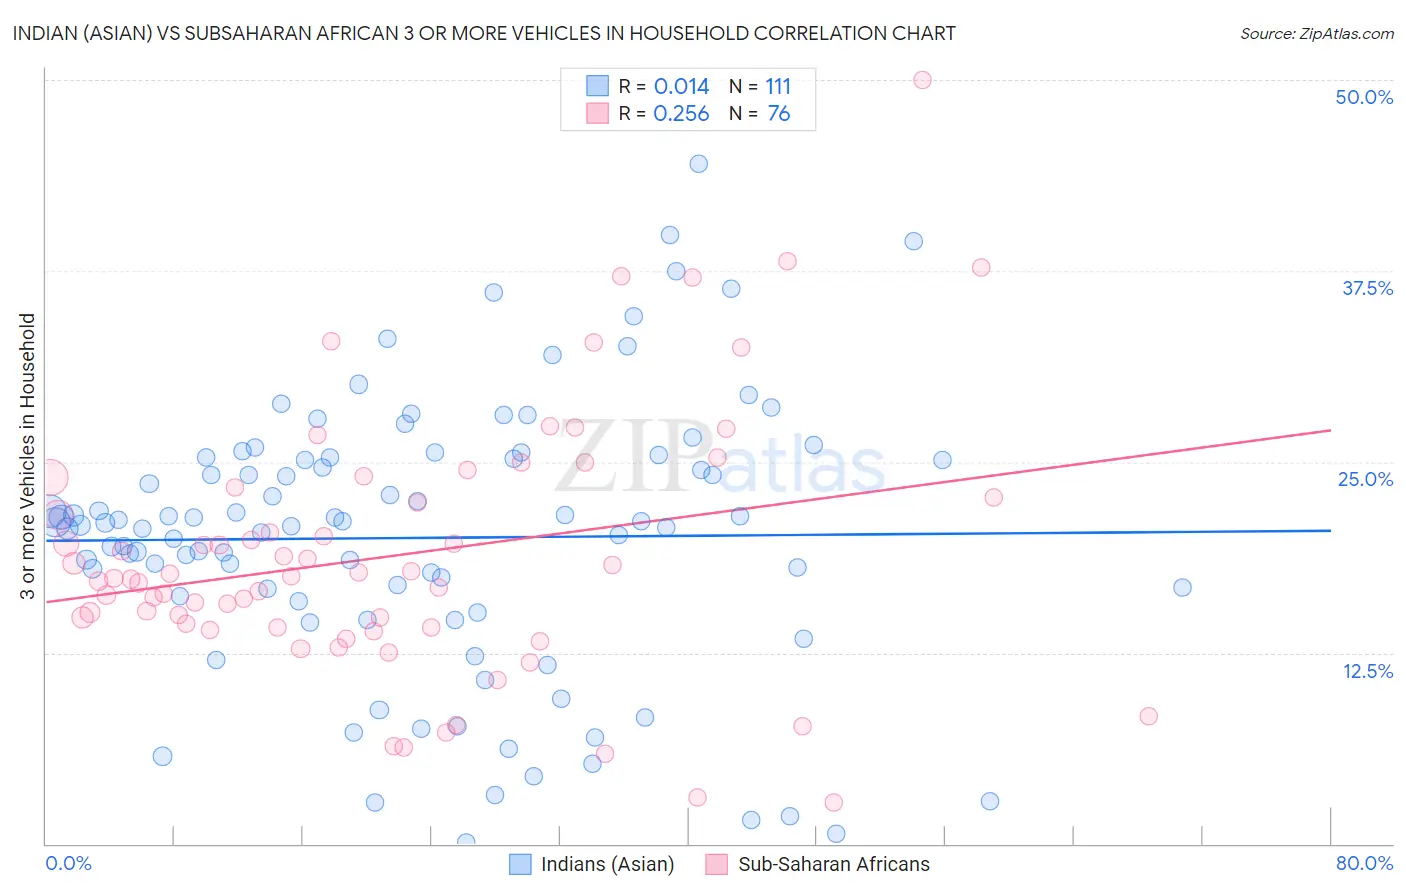 Indian (Asian) vs Subsaharan African 3 or more Vehicles in Household